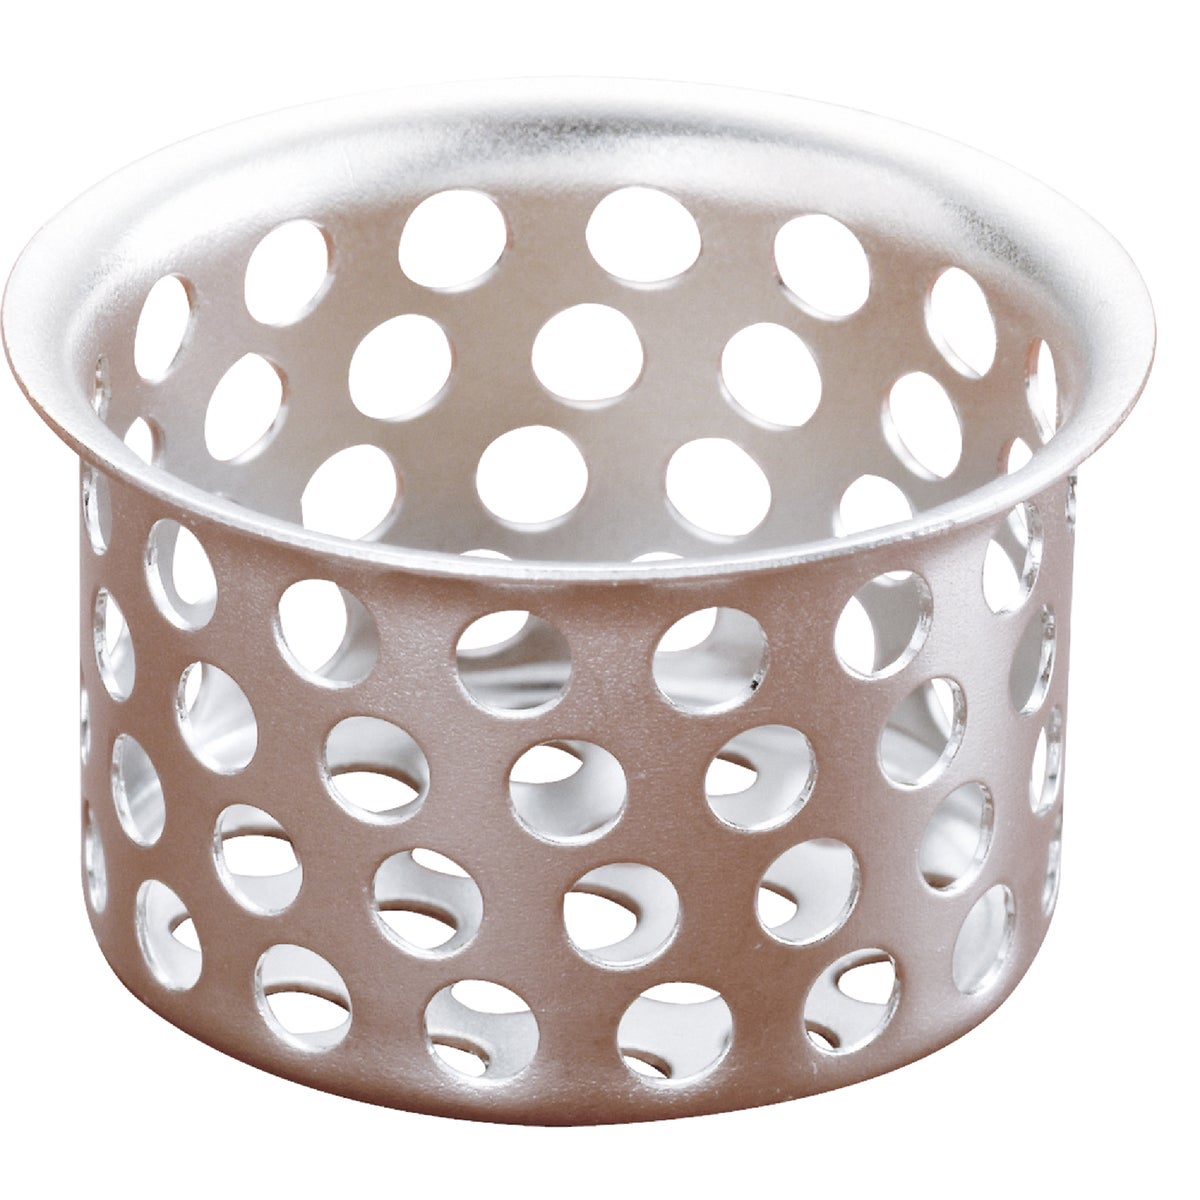 Do it 1 In. Chrome-Plated Steel Basin Sink Drain Strainer